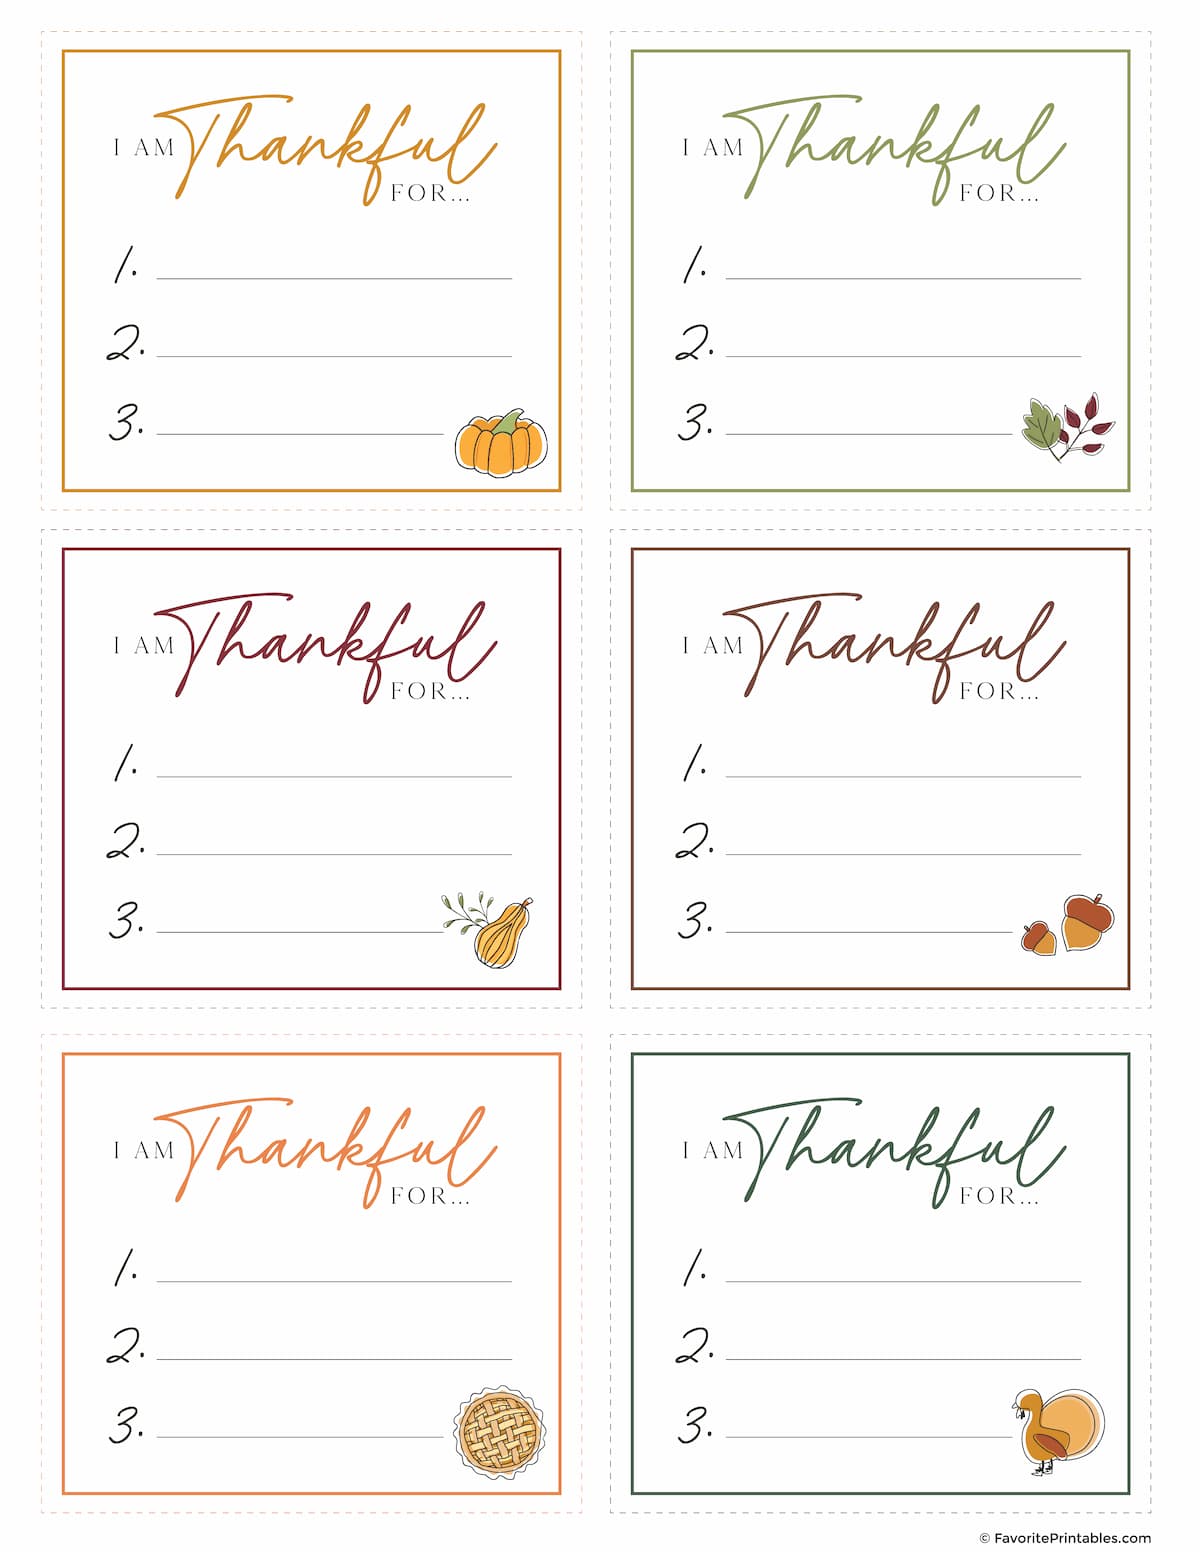 Free Printable I Am Thankful Cards preview.